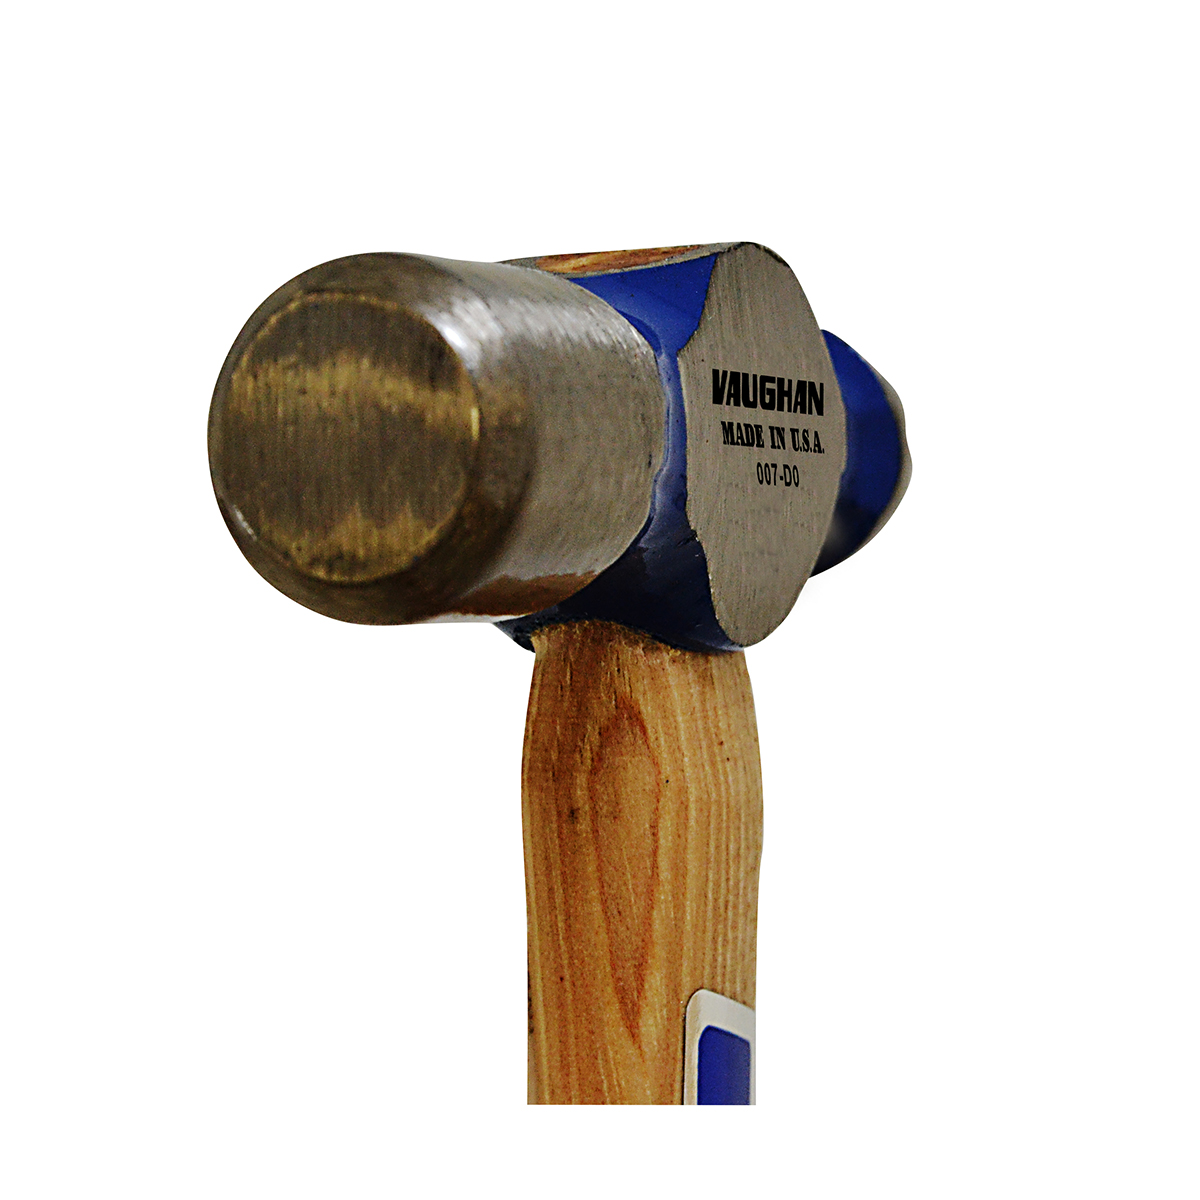 BALL PEIN HAMMER 4oz with 10-Inch Wood Handle